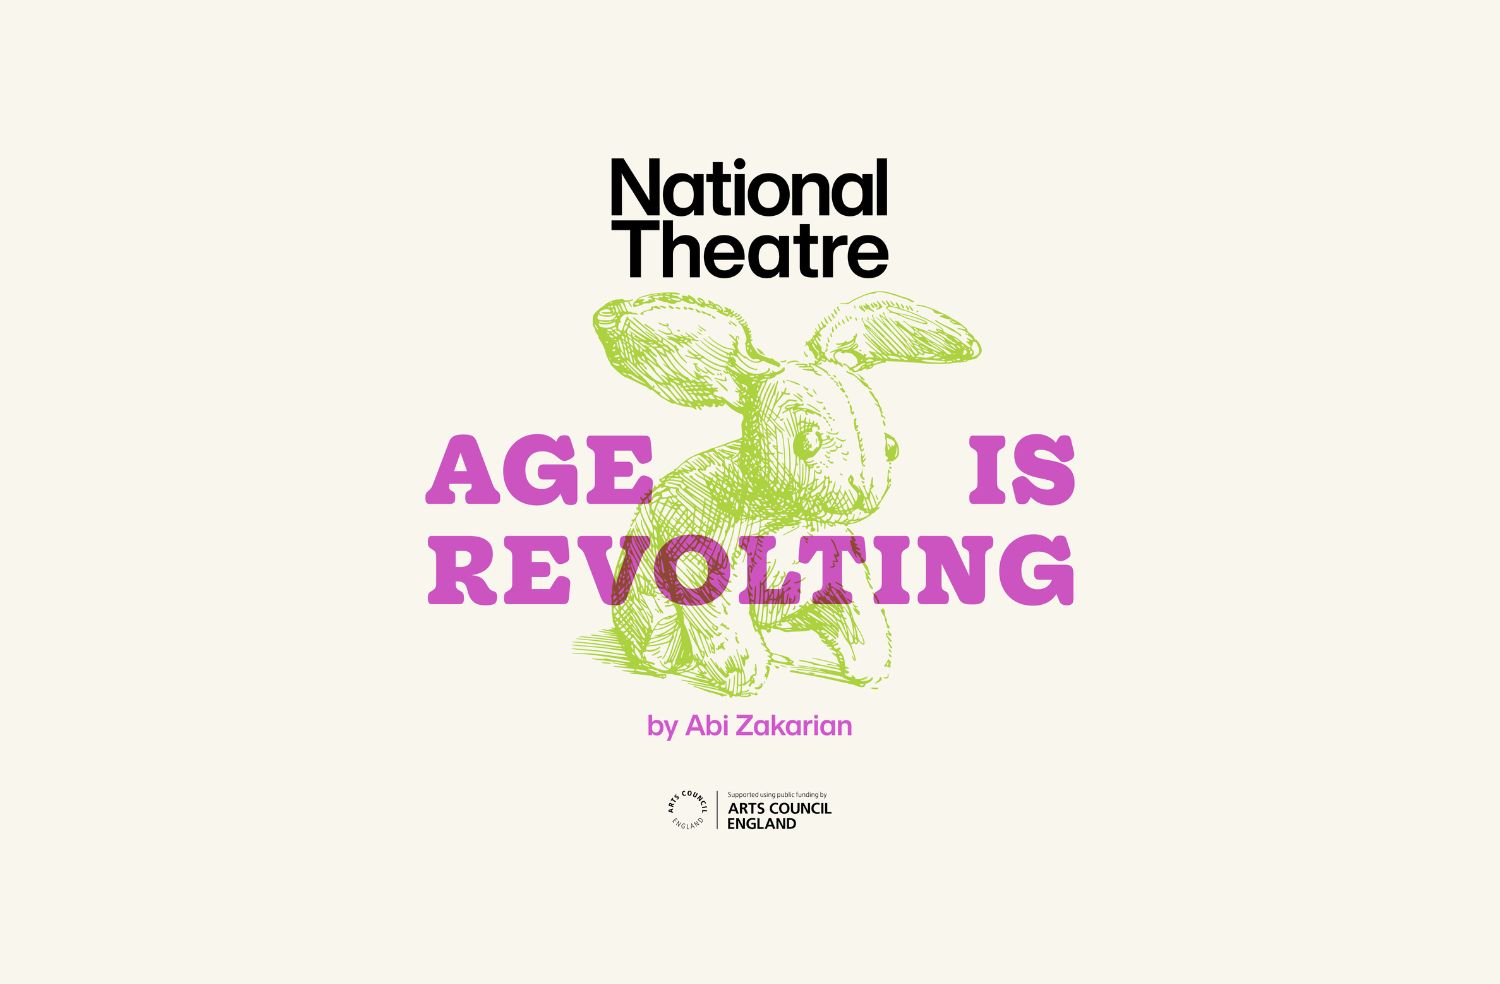 Age is revolting